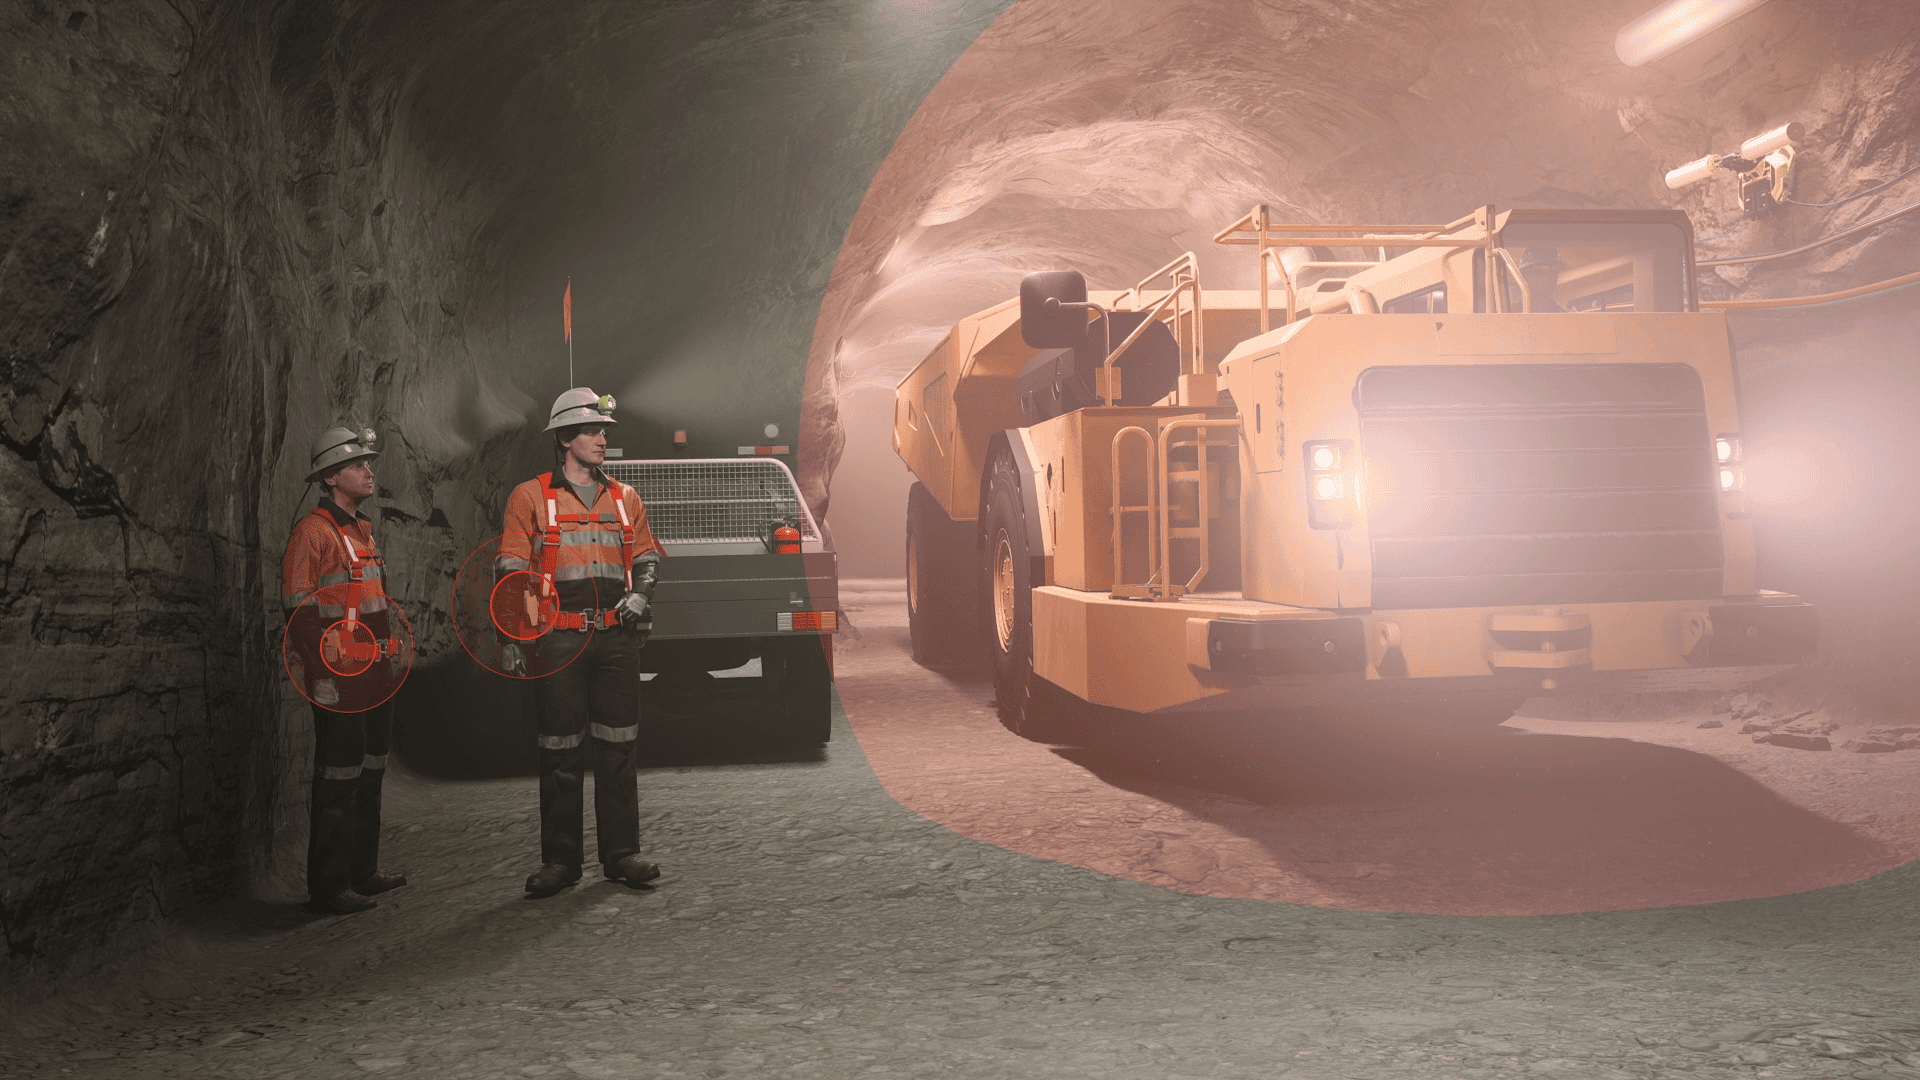 3D Animation Safety in the Mining Industry